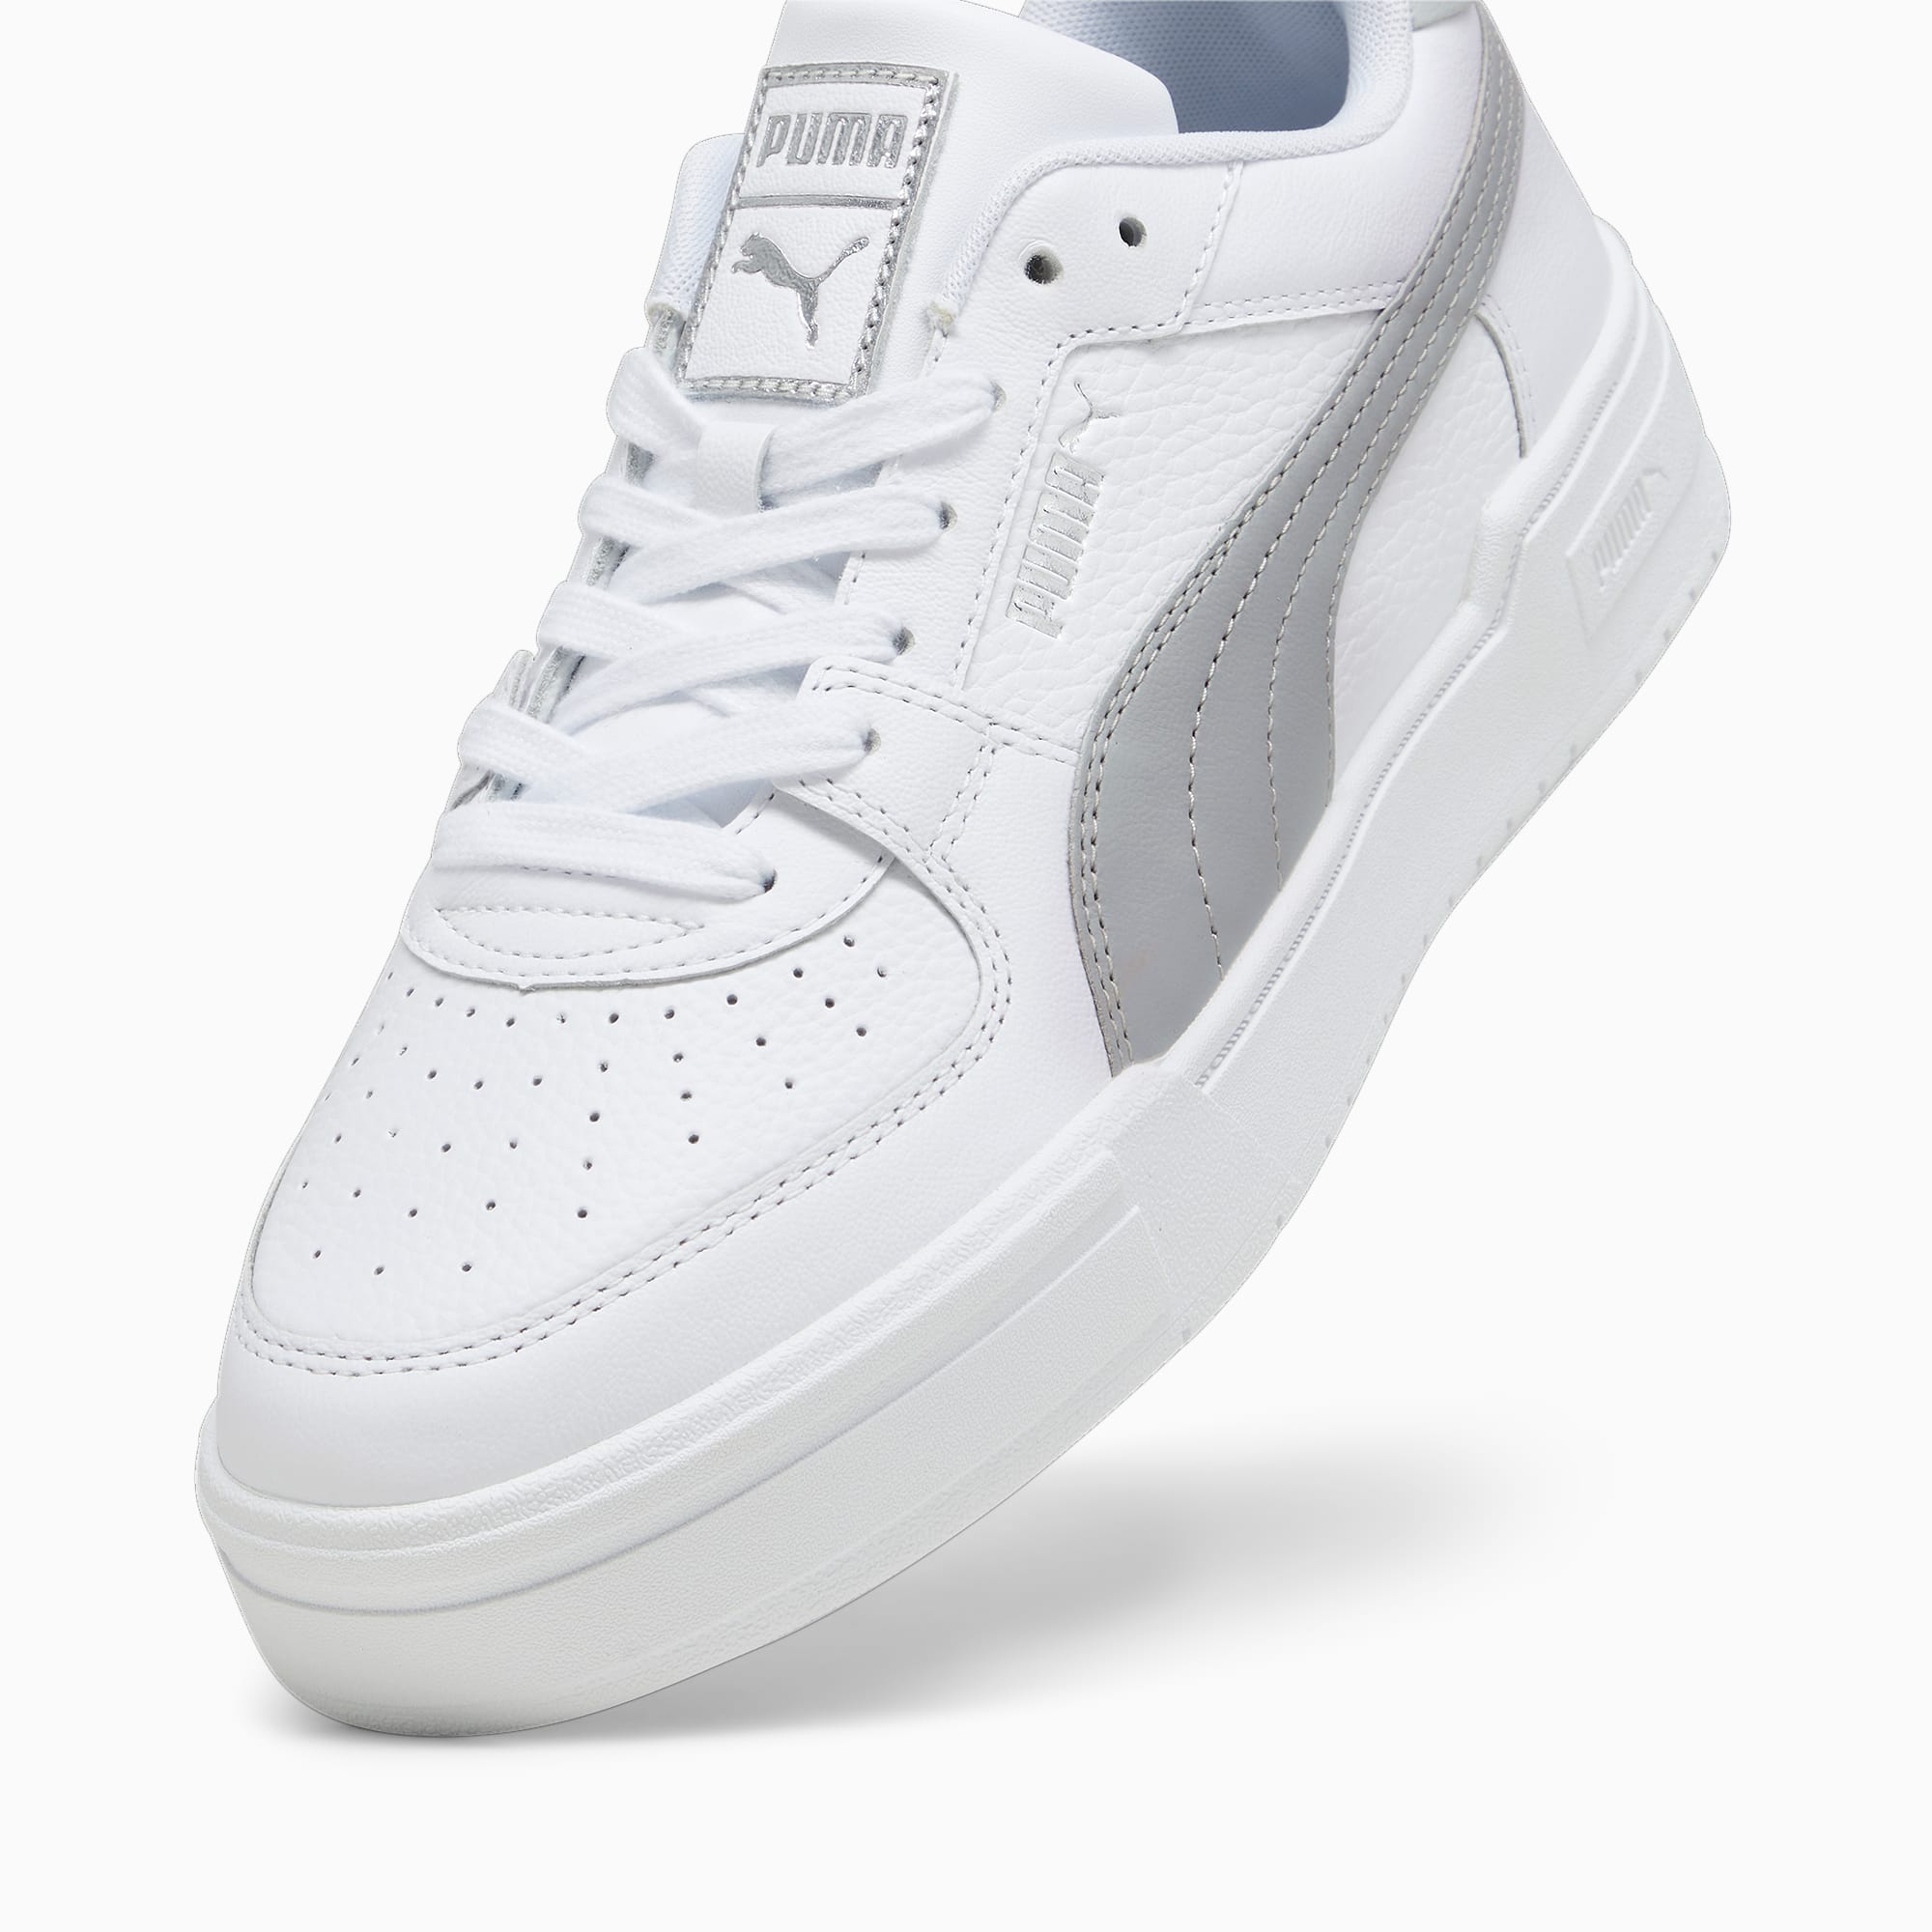 Women's PUMA Ca Pro Classic Trainers, White/Cool Light Grey, Size 49,5, Shoes